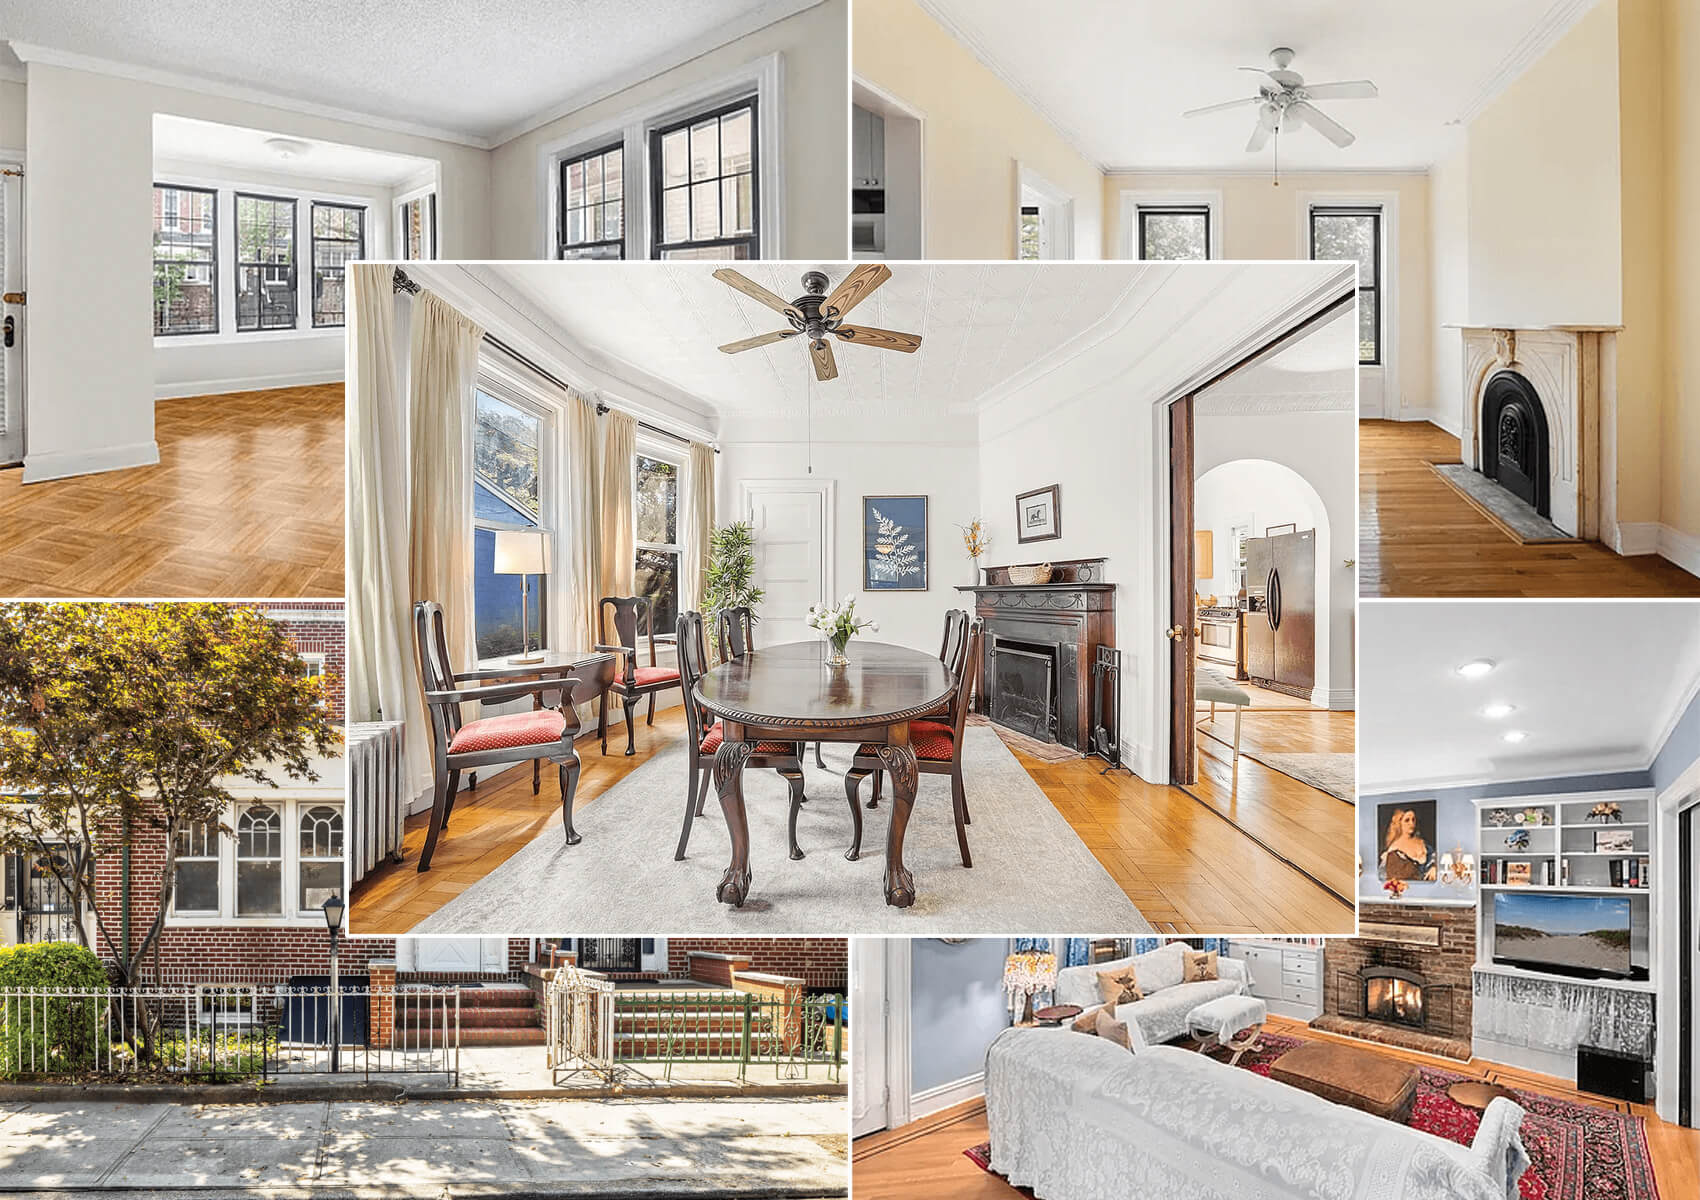 brooklyn listings - collage of interiors and exteriors of brooklyn houses for sale